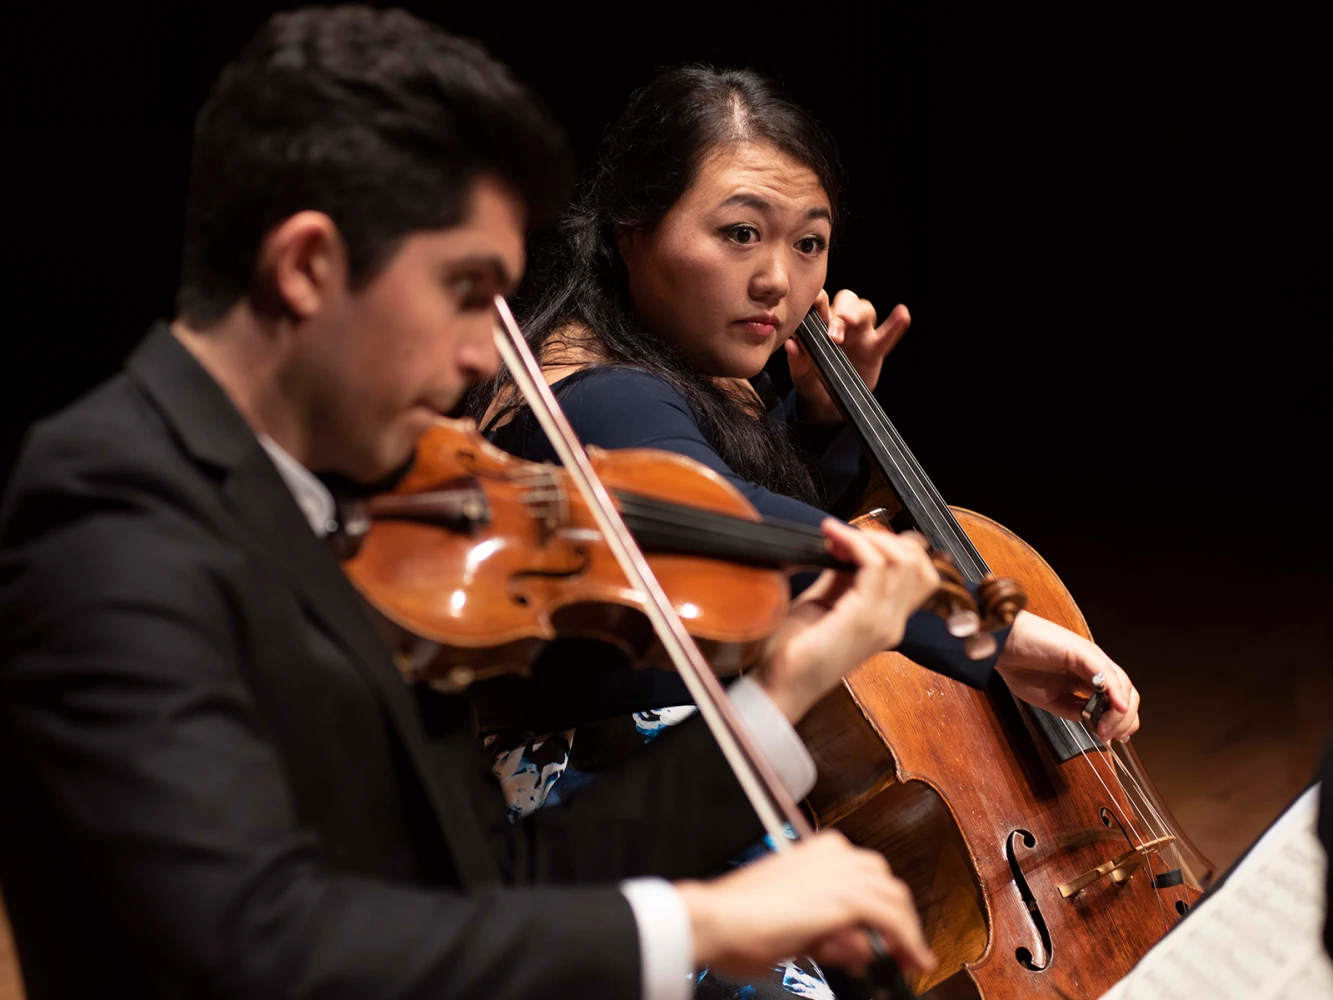 The Chamber Music Society of Lincoln Center: The Calidore String Quartet: What to expect - 2